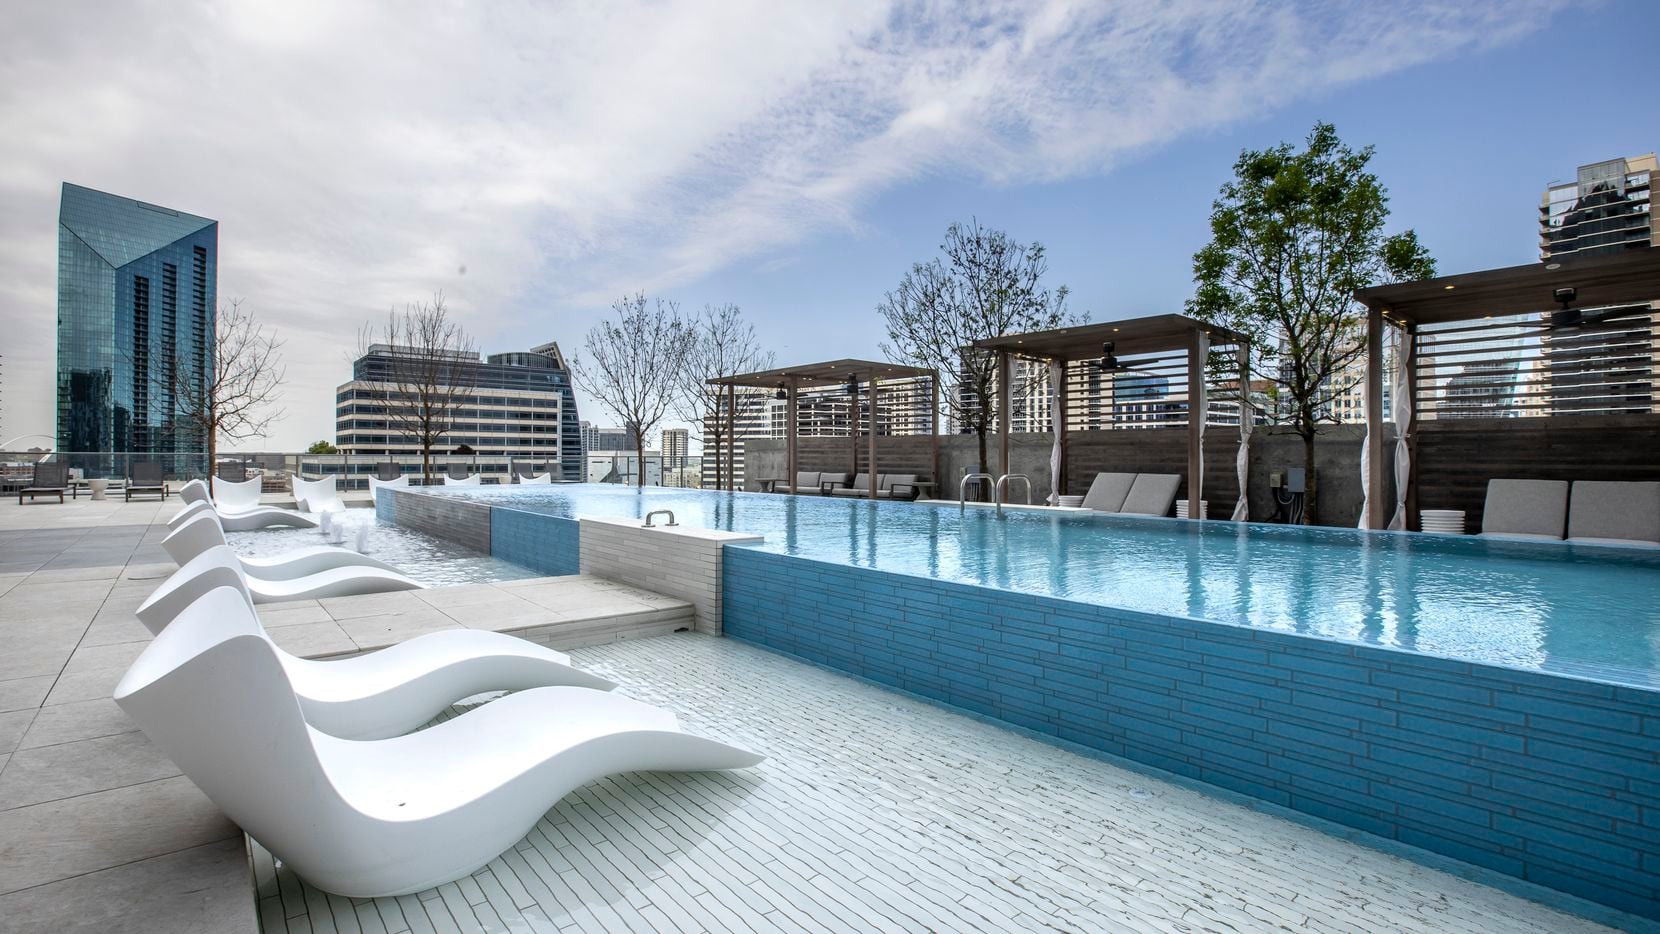 The 11th floor pool area of the Atelier, a new 41-story luxury residential building in the...